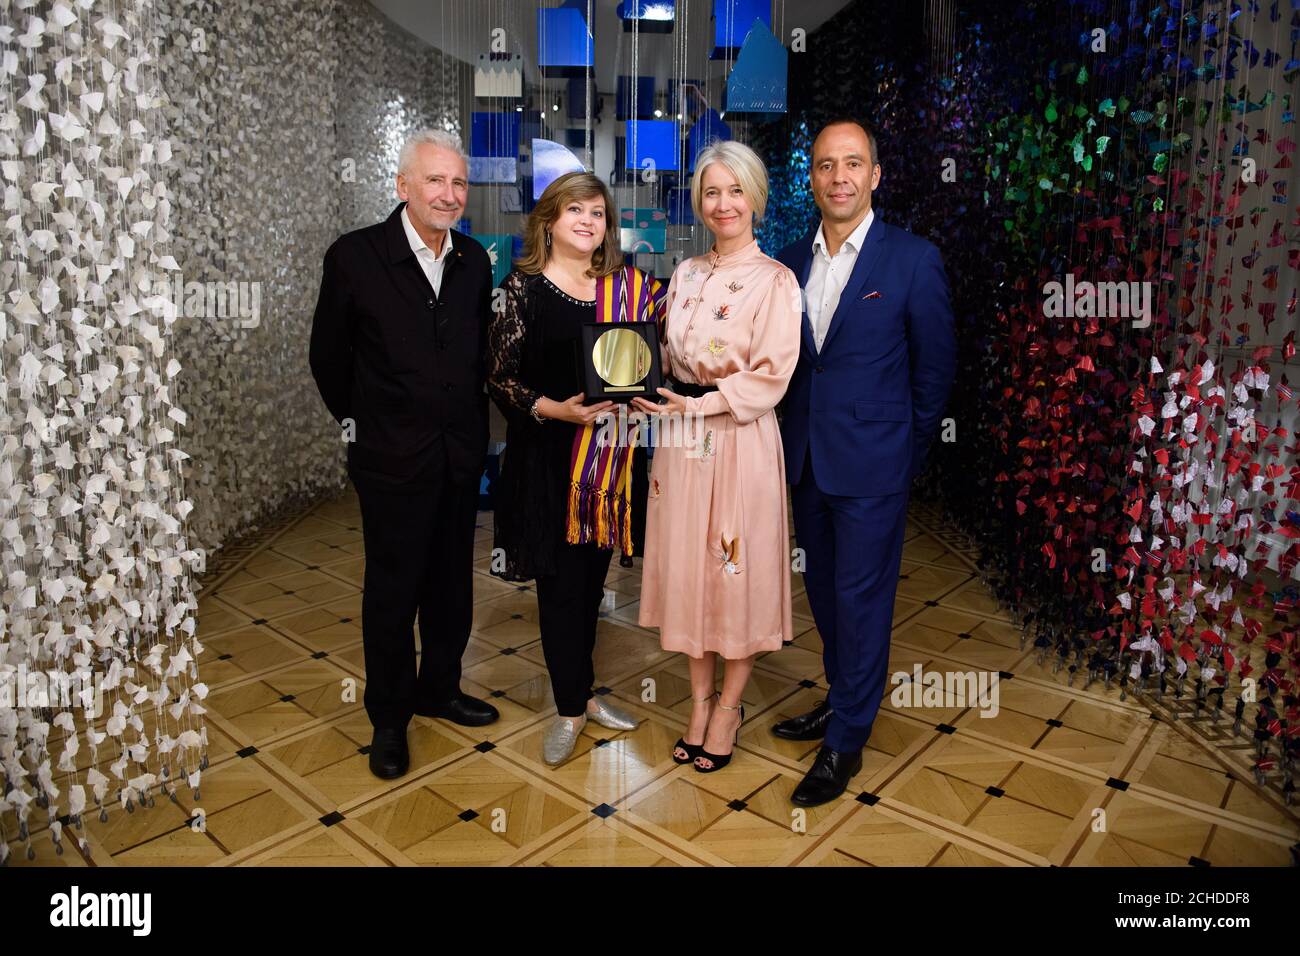 (left to right) Sir John Sorrell, President of London Biennale, Cecilia Santamarina de orive from Guatemala the winner of the London Design Biennale 2018 Public Medal, Justine Simons, Deputy Mayor for Culture and the Creative Industries and Sumantro Ghose, Managing Director London Design Biennale, at Somerset House, London. Stock Photo